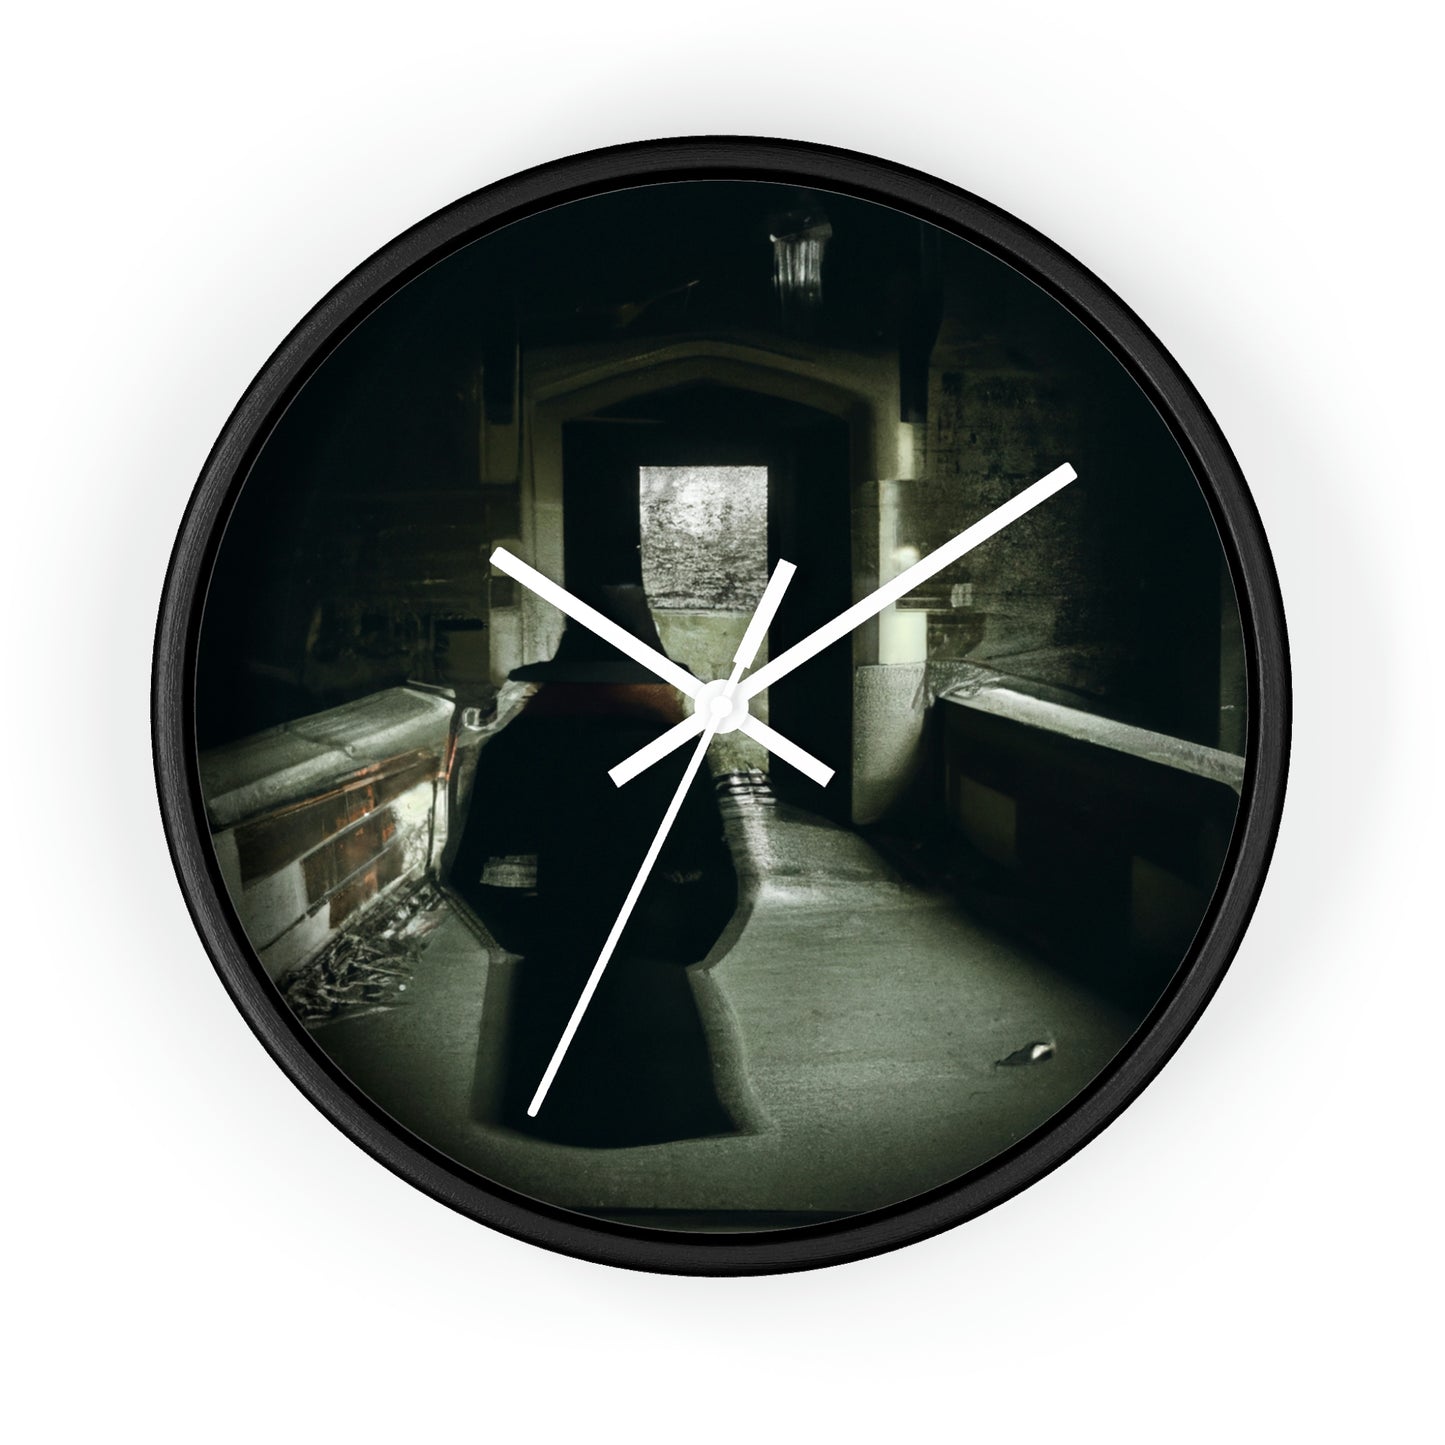 "The Enigmatic Visitor of the Ancient Castle" - The Alien Wall Clock